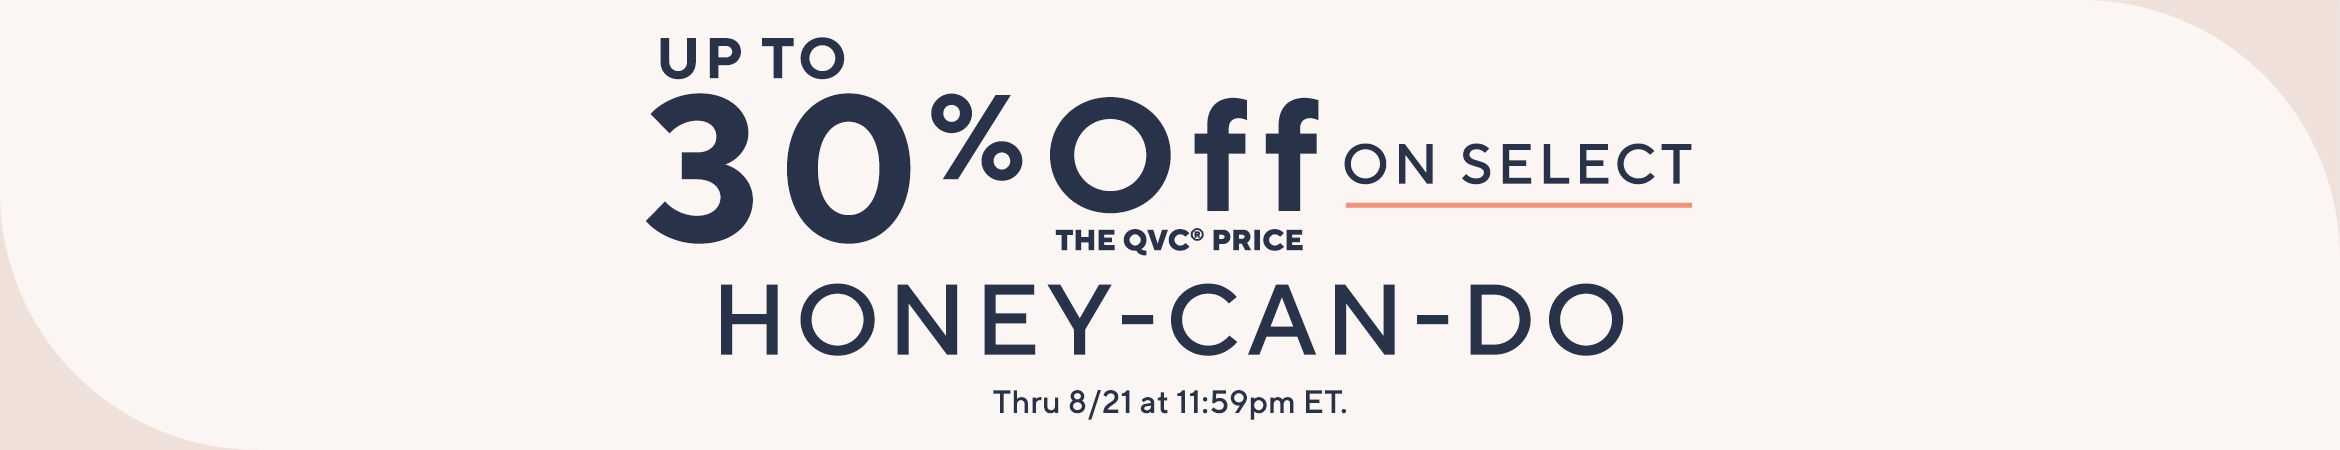 Up to 30% Off the QVC® Price on Select Honey-Can-Do Thru 8/21 at 11:59pm ET.